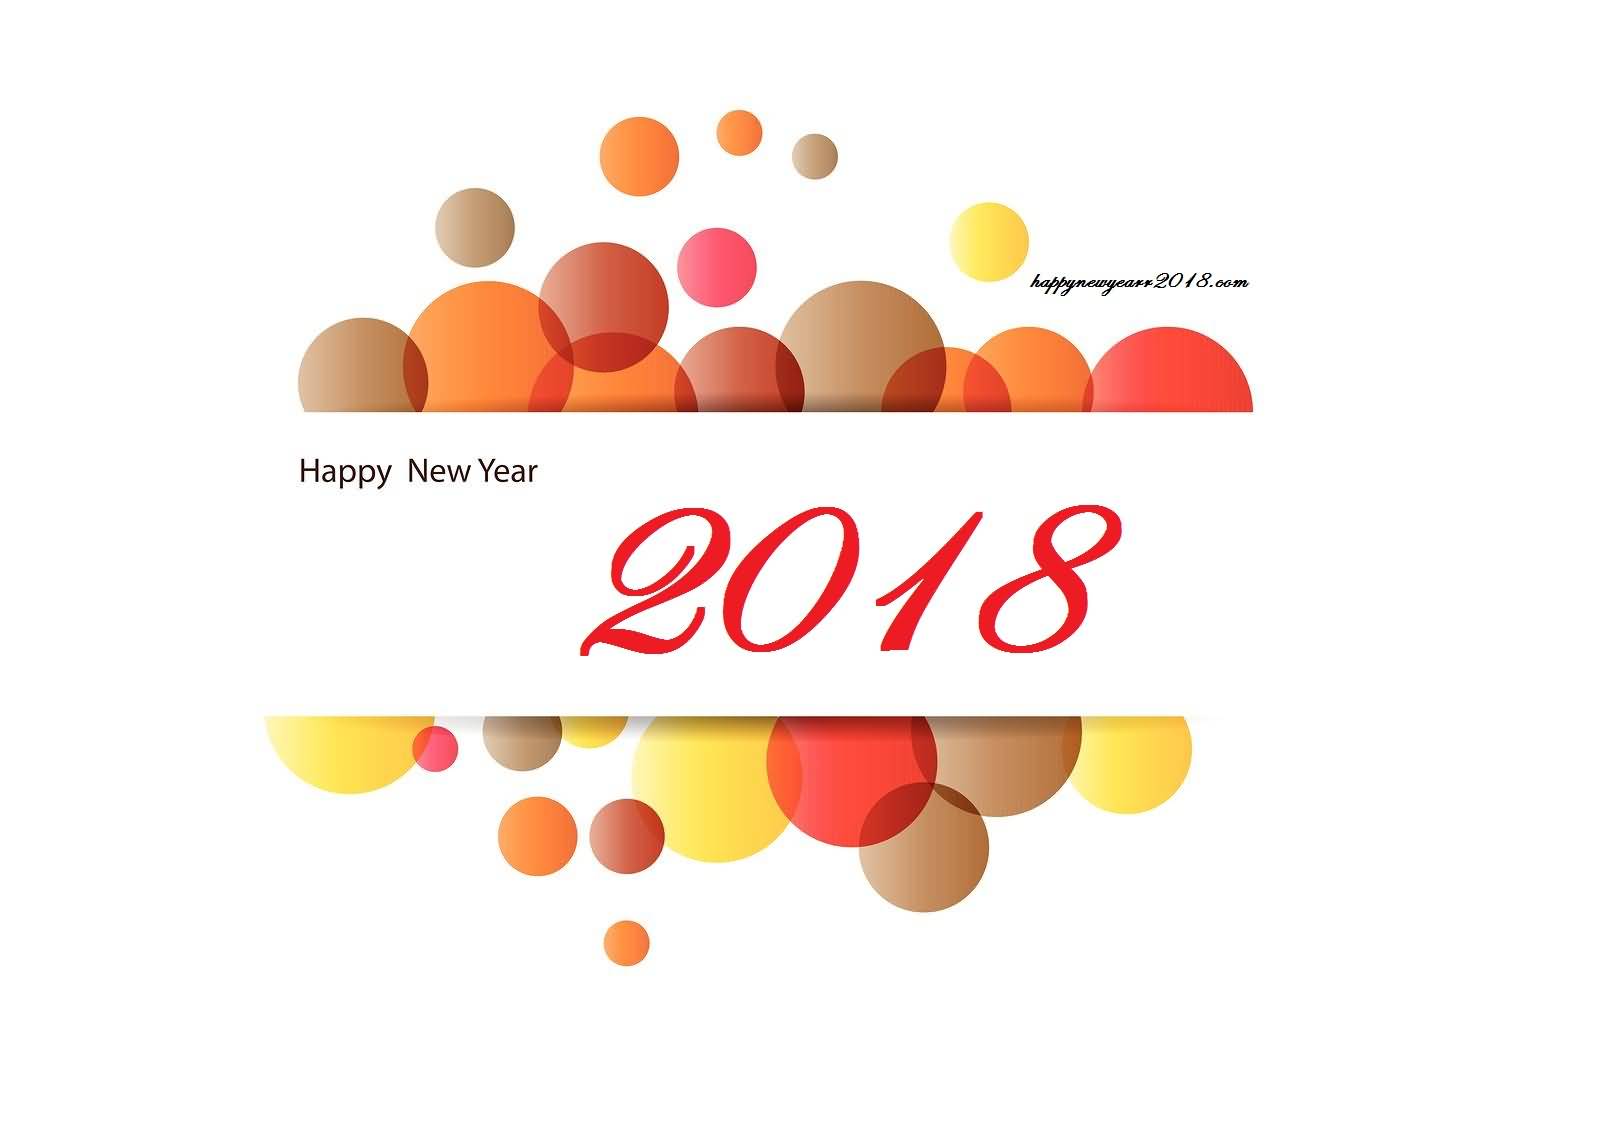 Happy New Year 2018 Cards Image Picture Photo Wallpaper 04